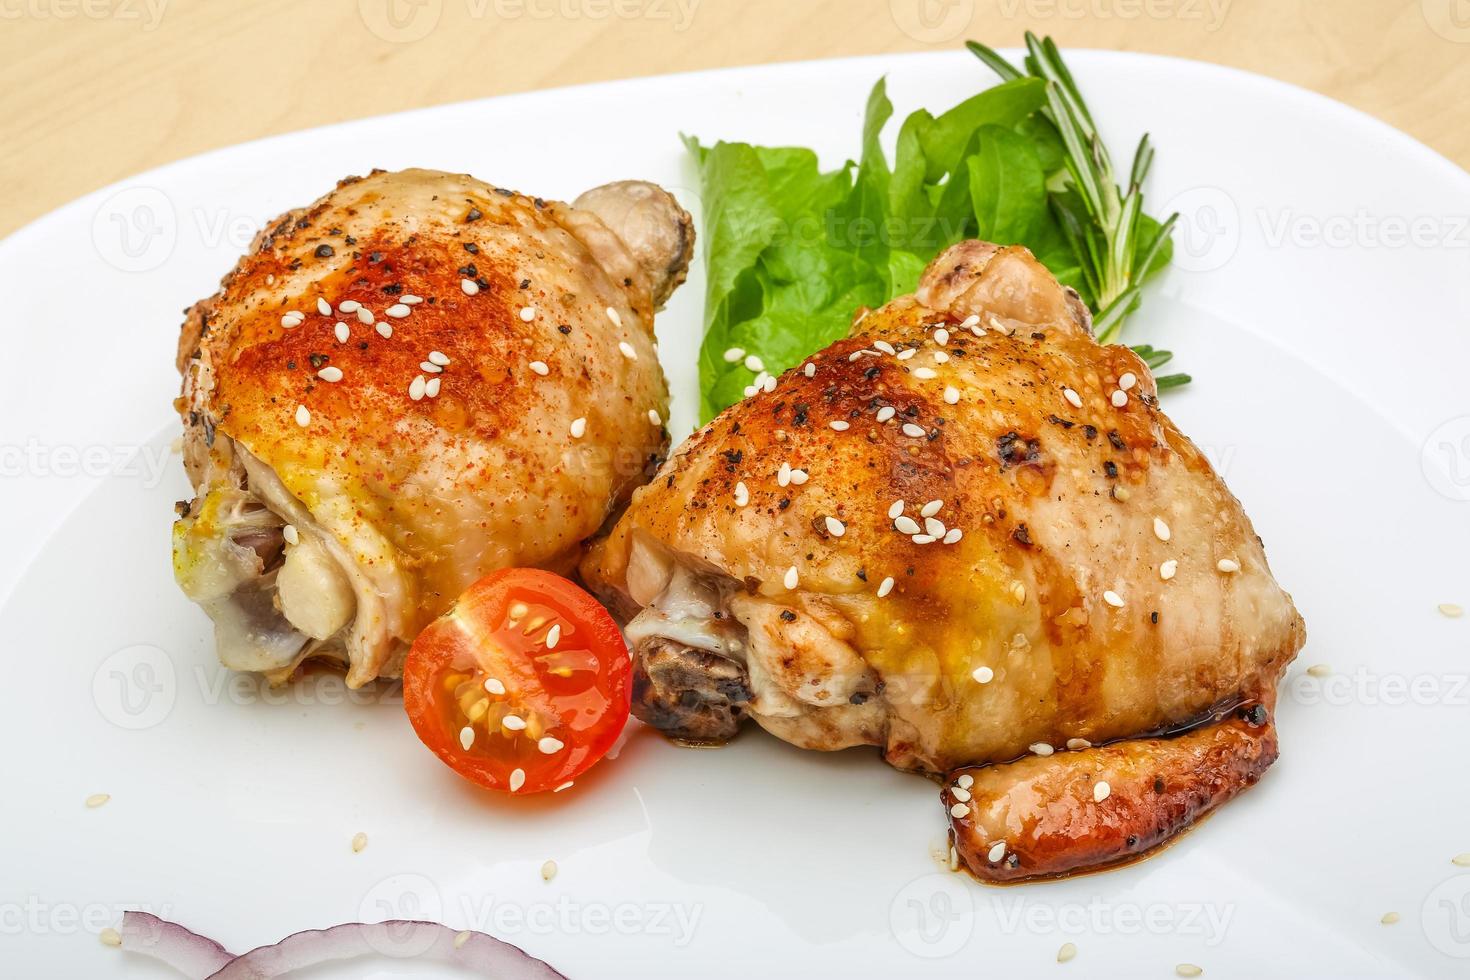 Roasted chicken thighs photo